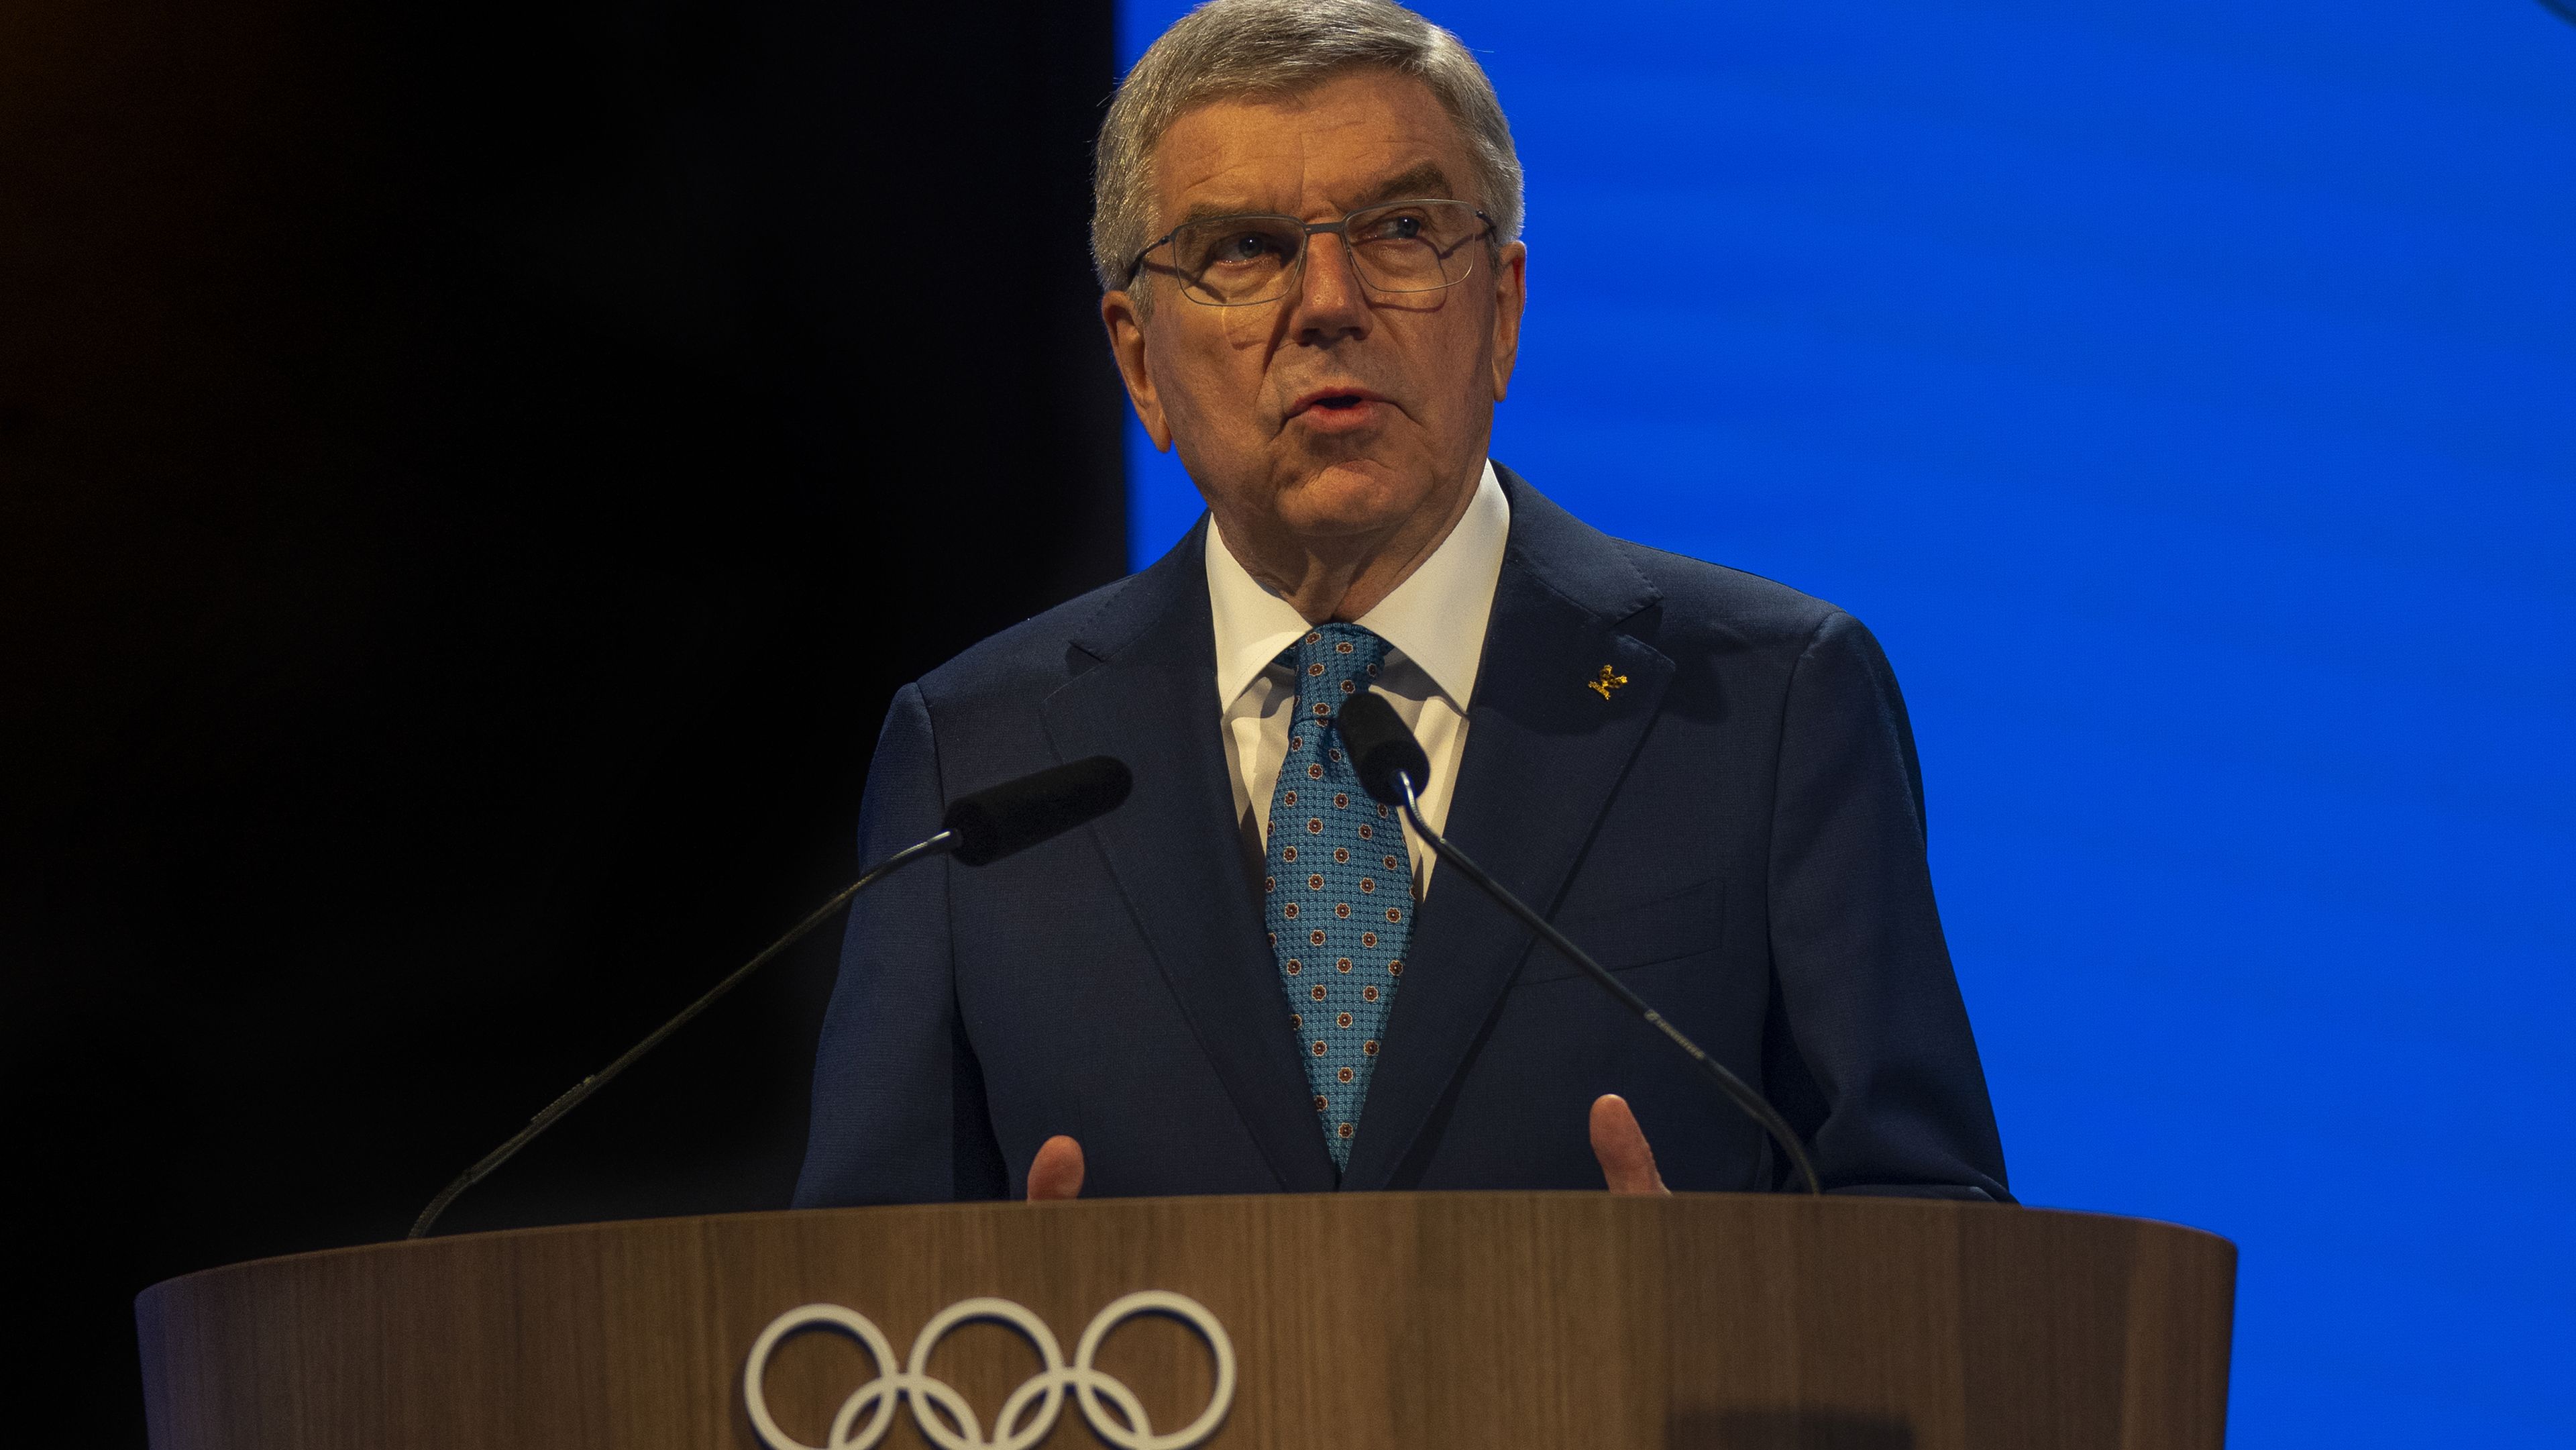 International Olympic Committee president Thomas Bach speaks at the 141st IOC session.